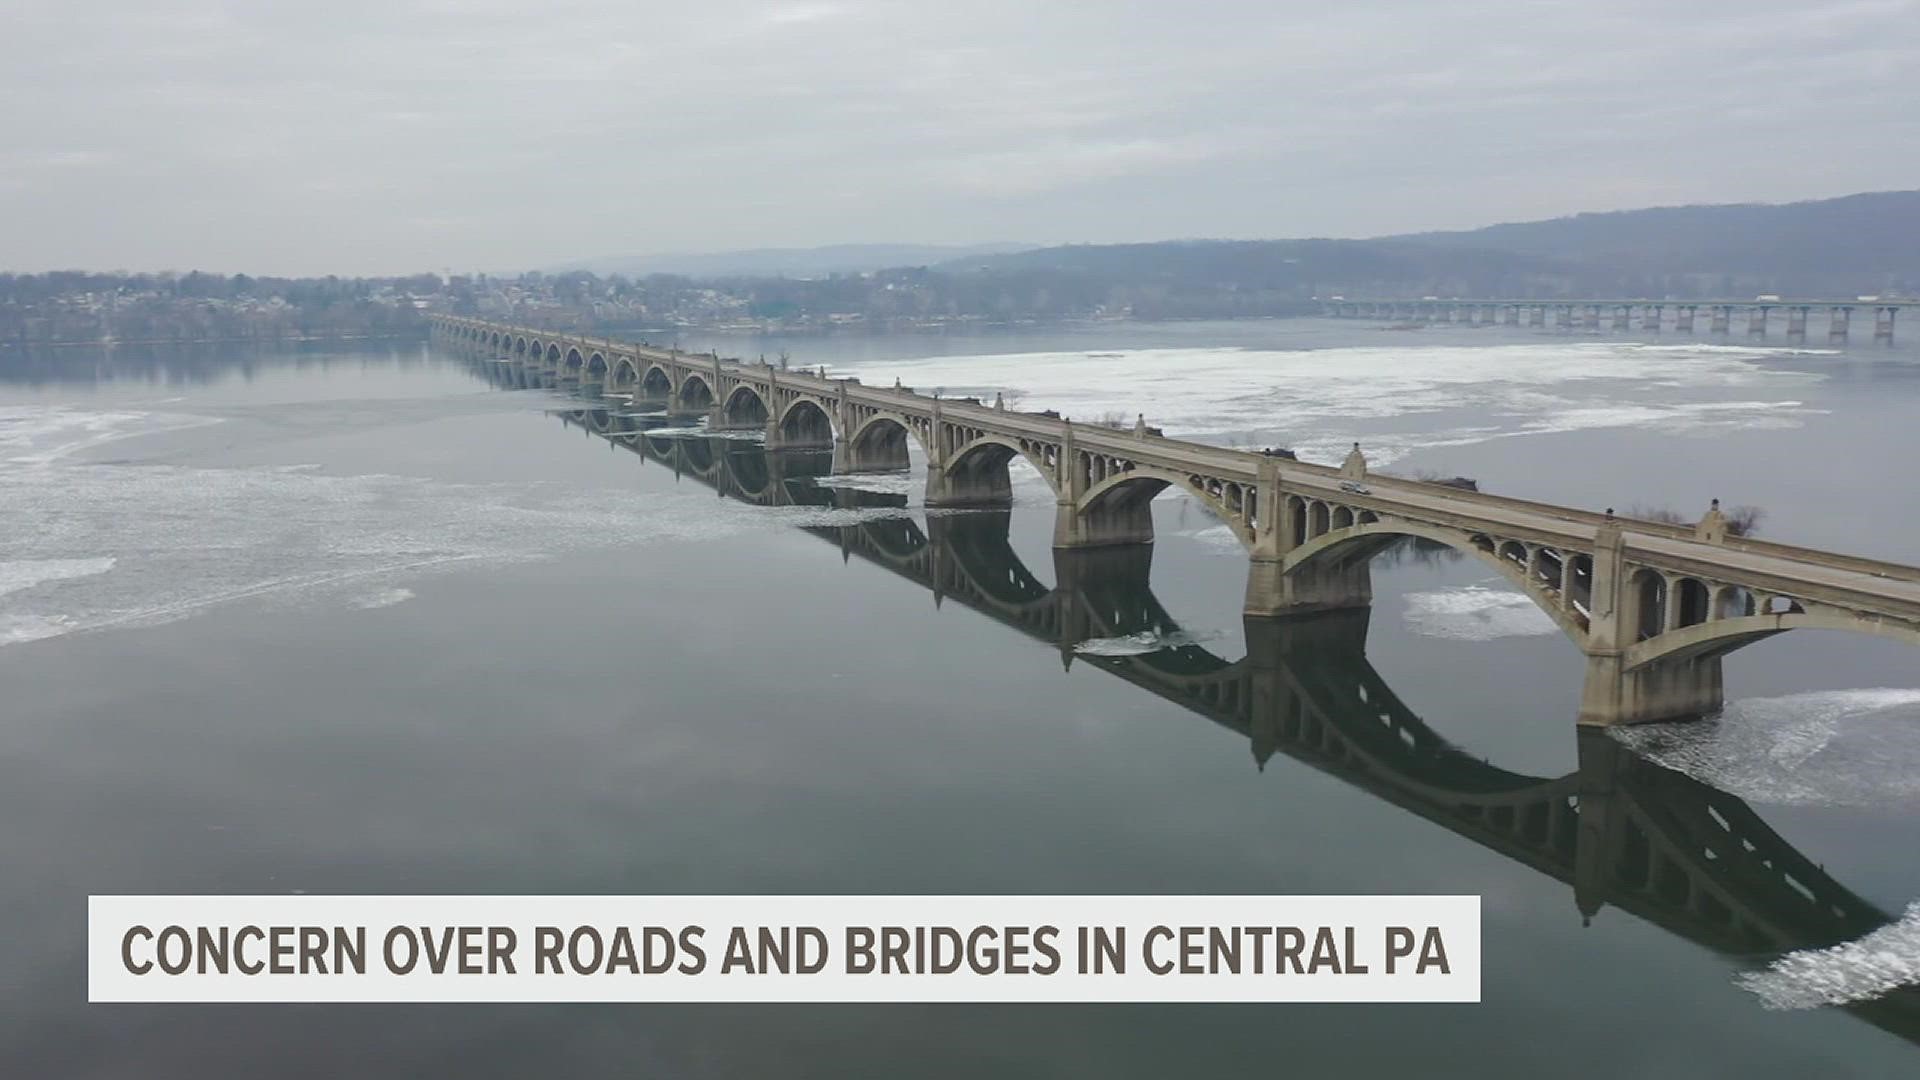 Some members of the Central Pa. community say they sometimes don’t feel safe driving some roads and bridges.